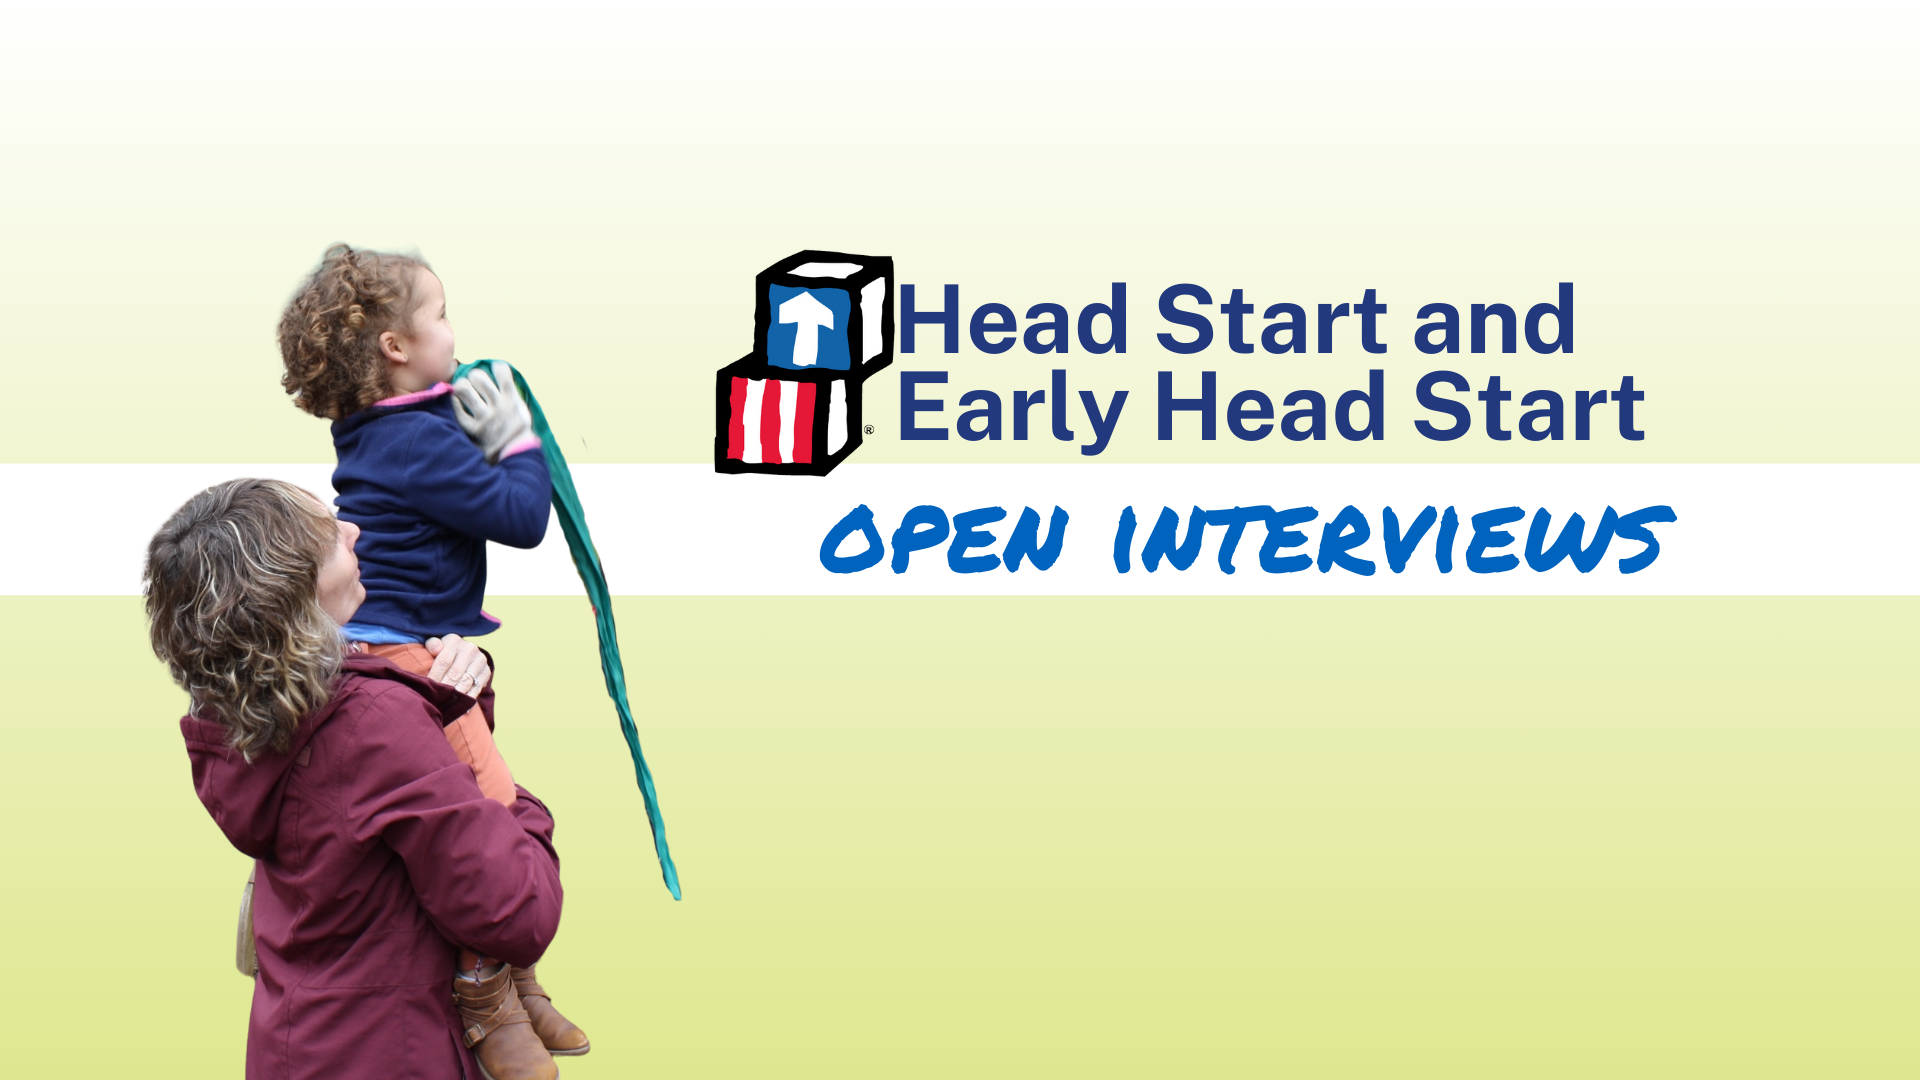 Green background with woman holding a children up while holding a ball. Text reads, "Head Start and Early Head Start Open Interviews"